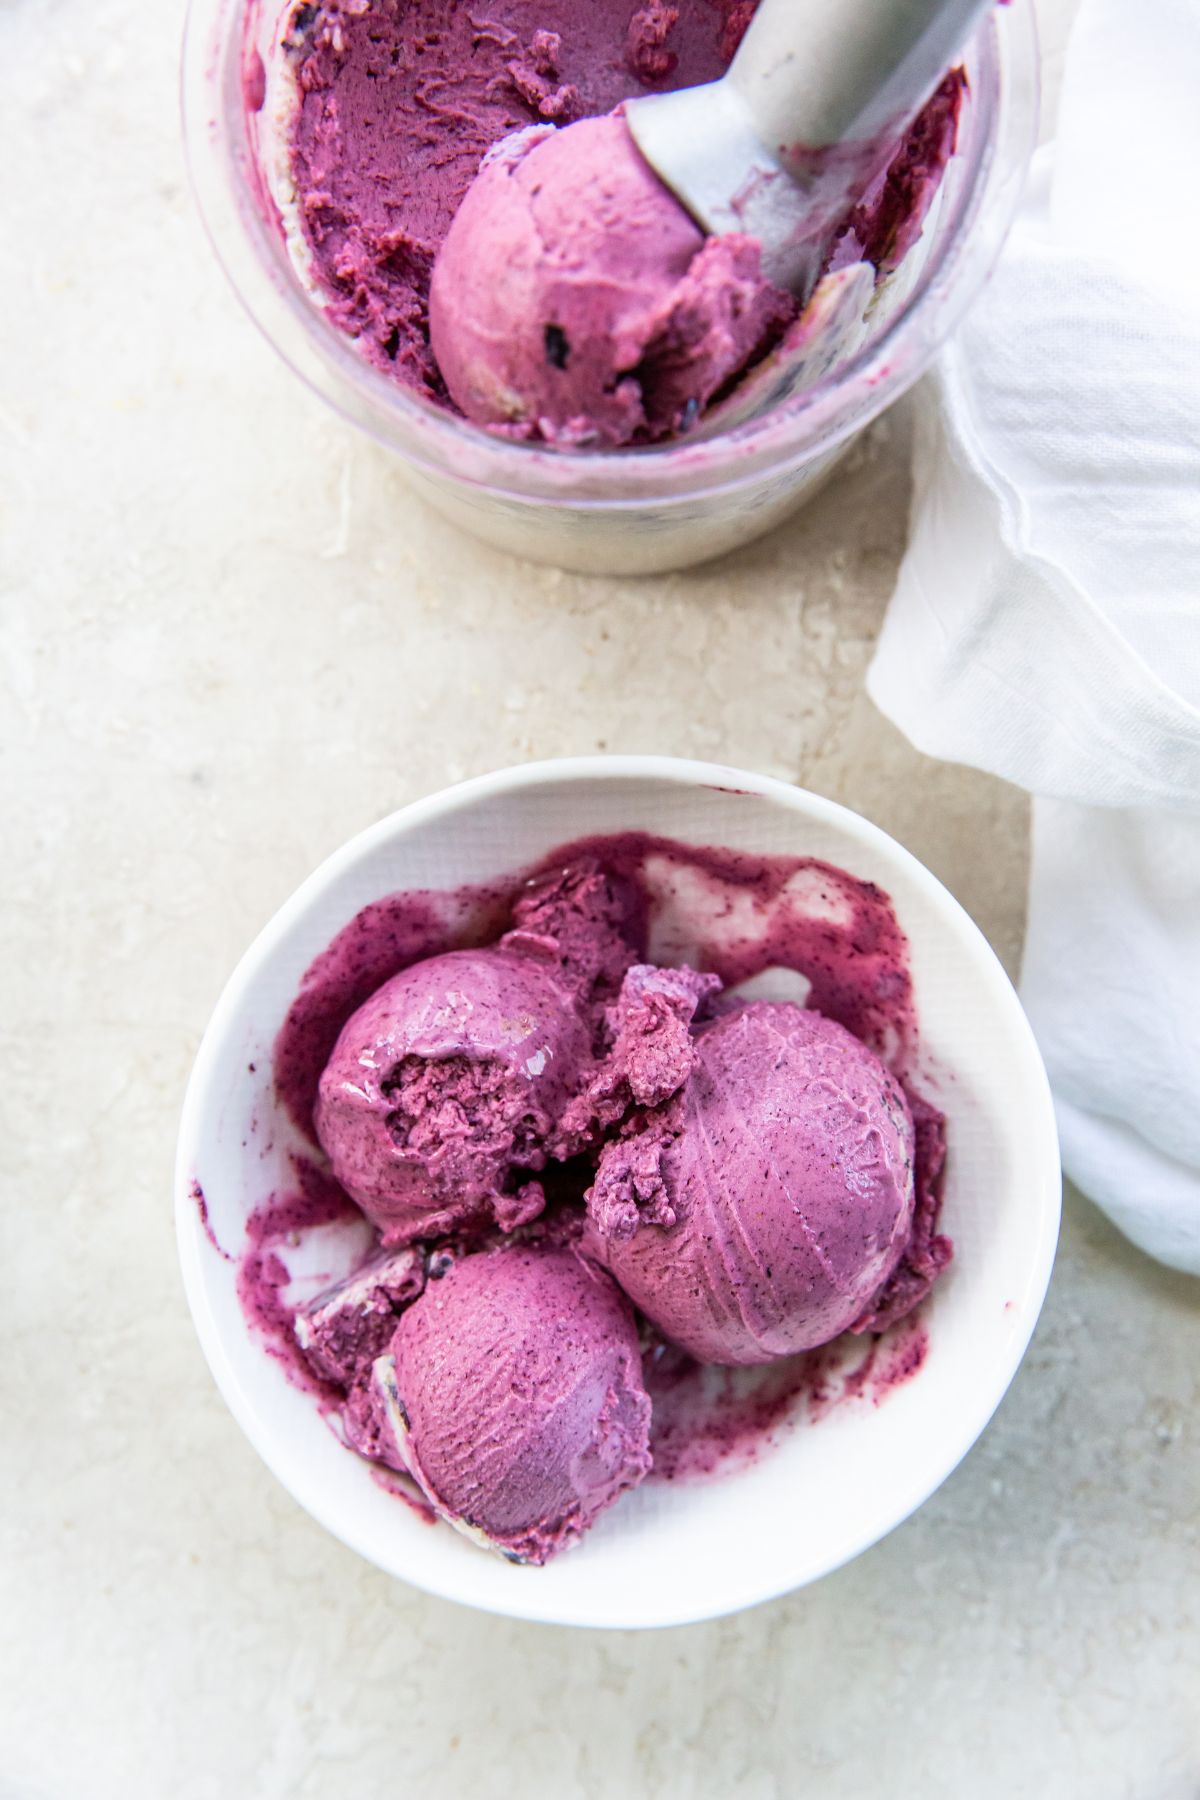 A blueberry ice cream bowl with a scoop in it.